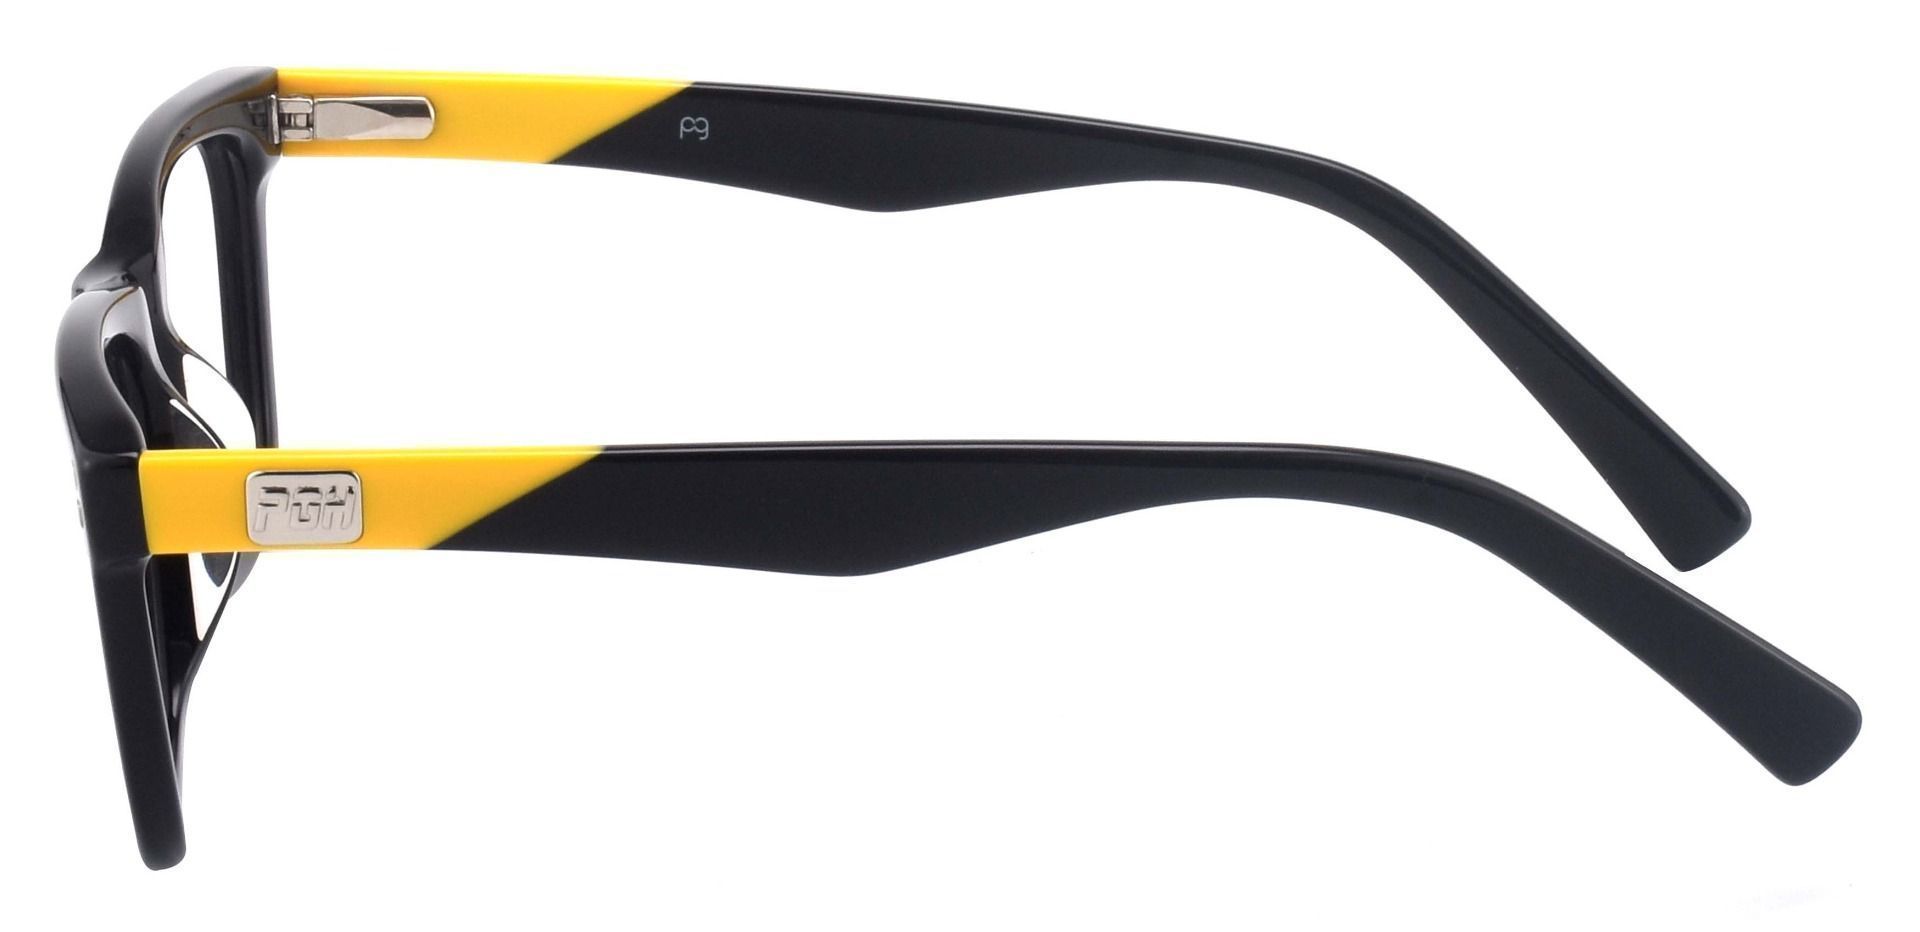 Blitz Rectangle Reading Glasses - The Frame Is Black And Yellow